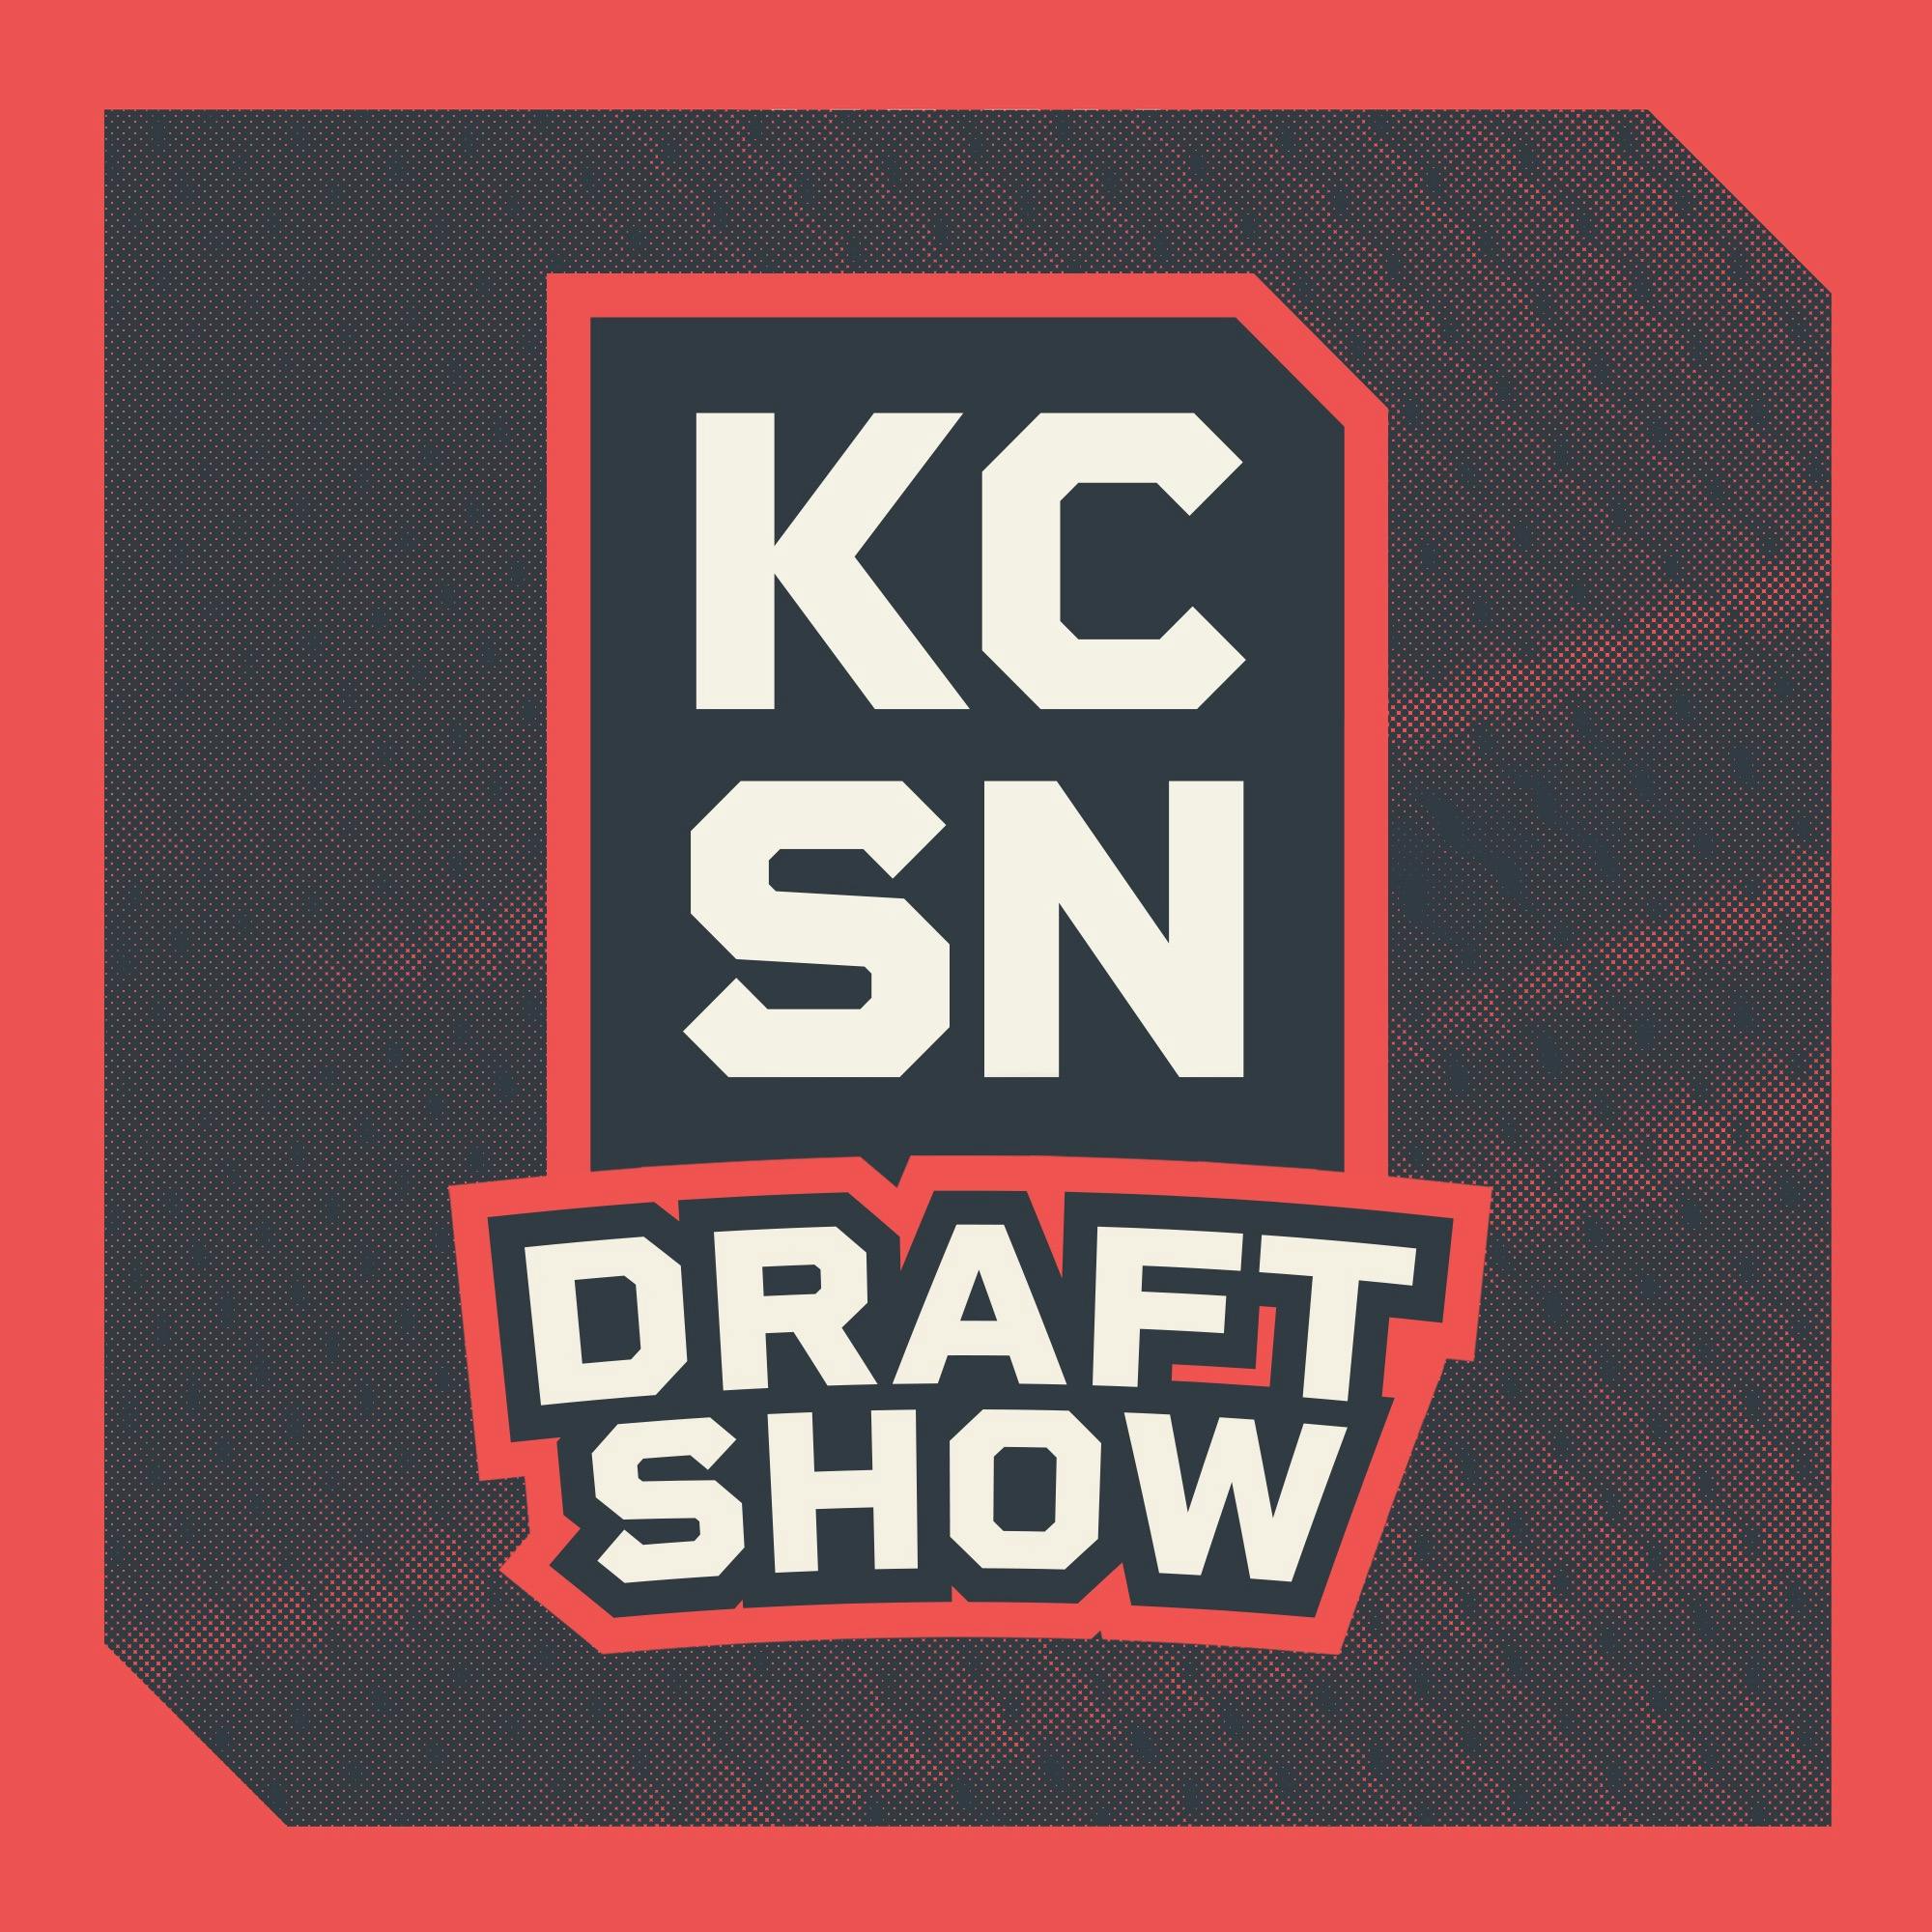 KCSN Draft Show 3/20: Ranking 5 of the Latest NFL Mock Drafts For the Chiefs at No. 31 with ESPN's Matt Miller